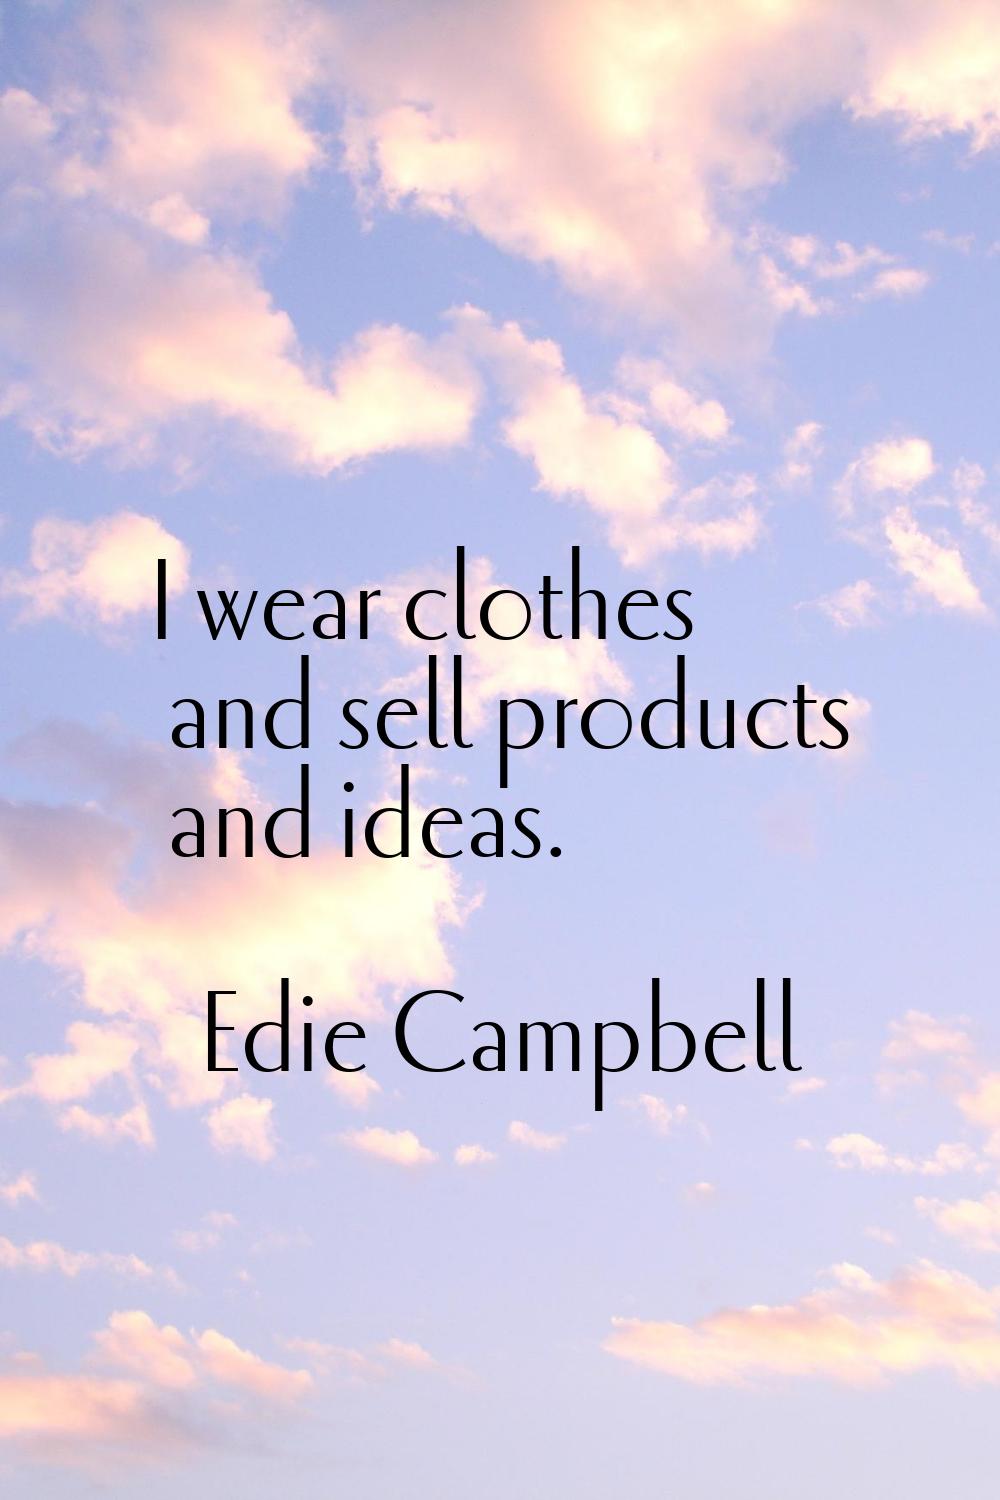 I wear clothes and sell products and ideas.